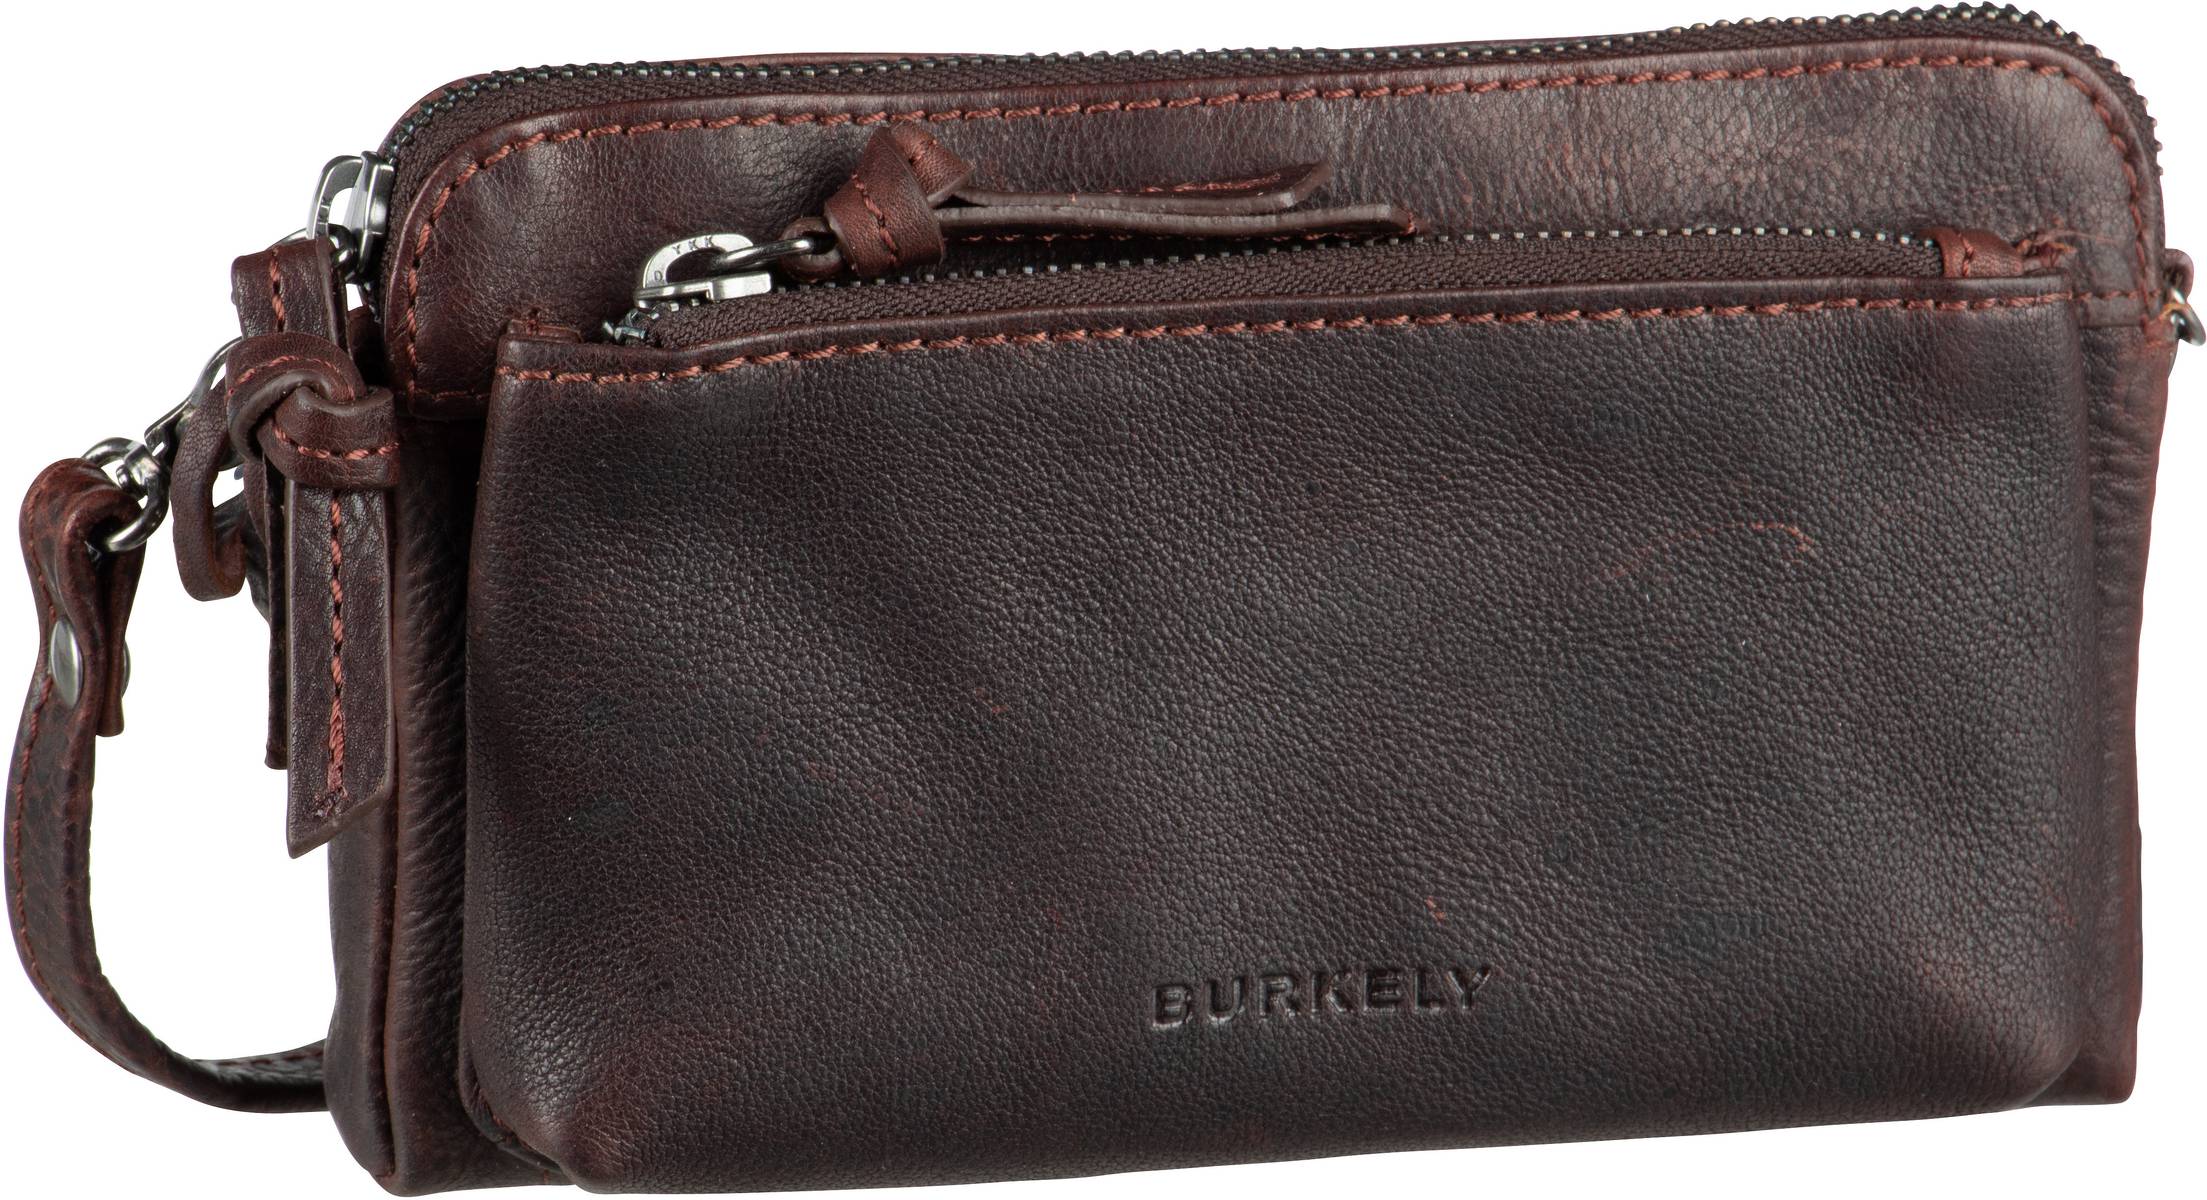 Burkely Antique Avery Mini Bag 8718 - Brown